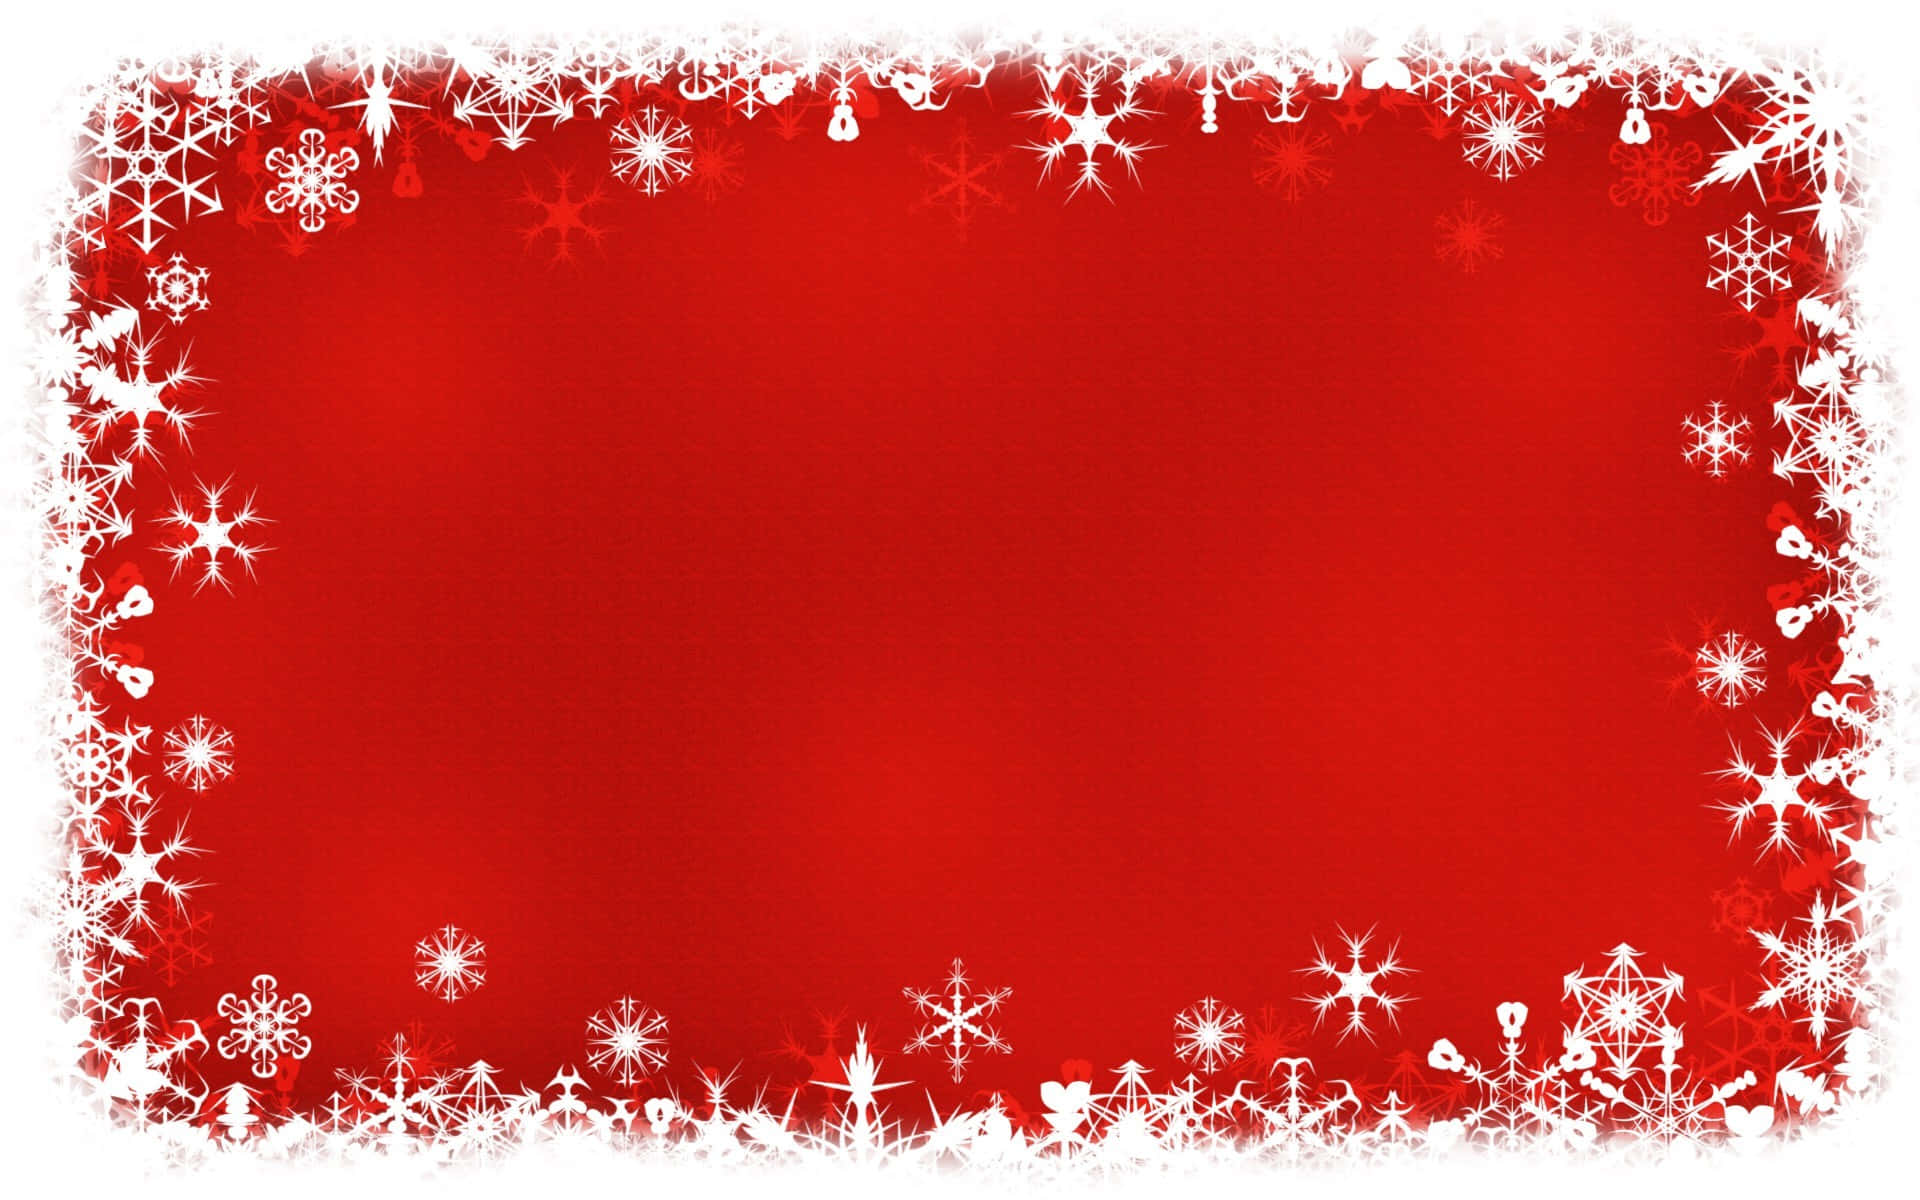 Festive and Aesthetically Pleasing Red Aesthetic Christmas Wallpaper